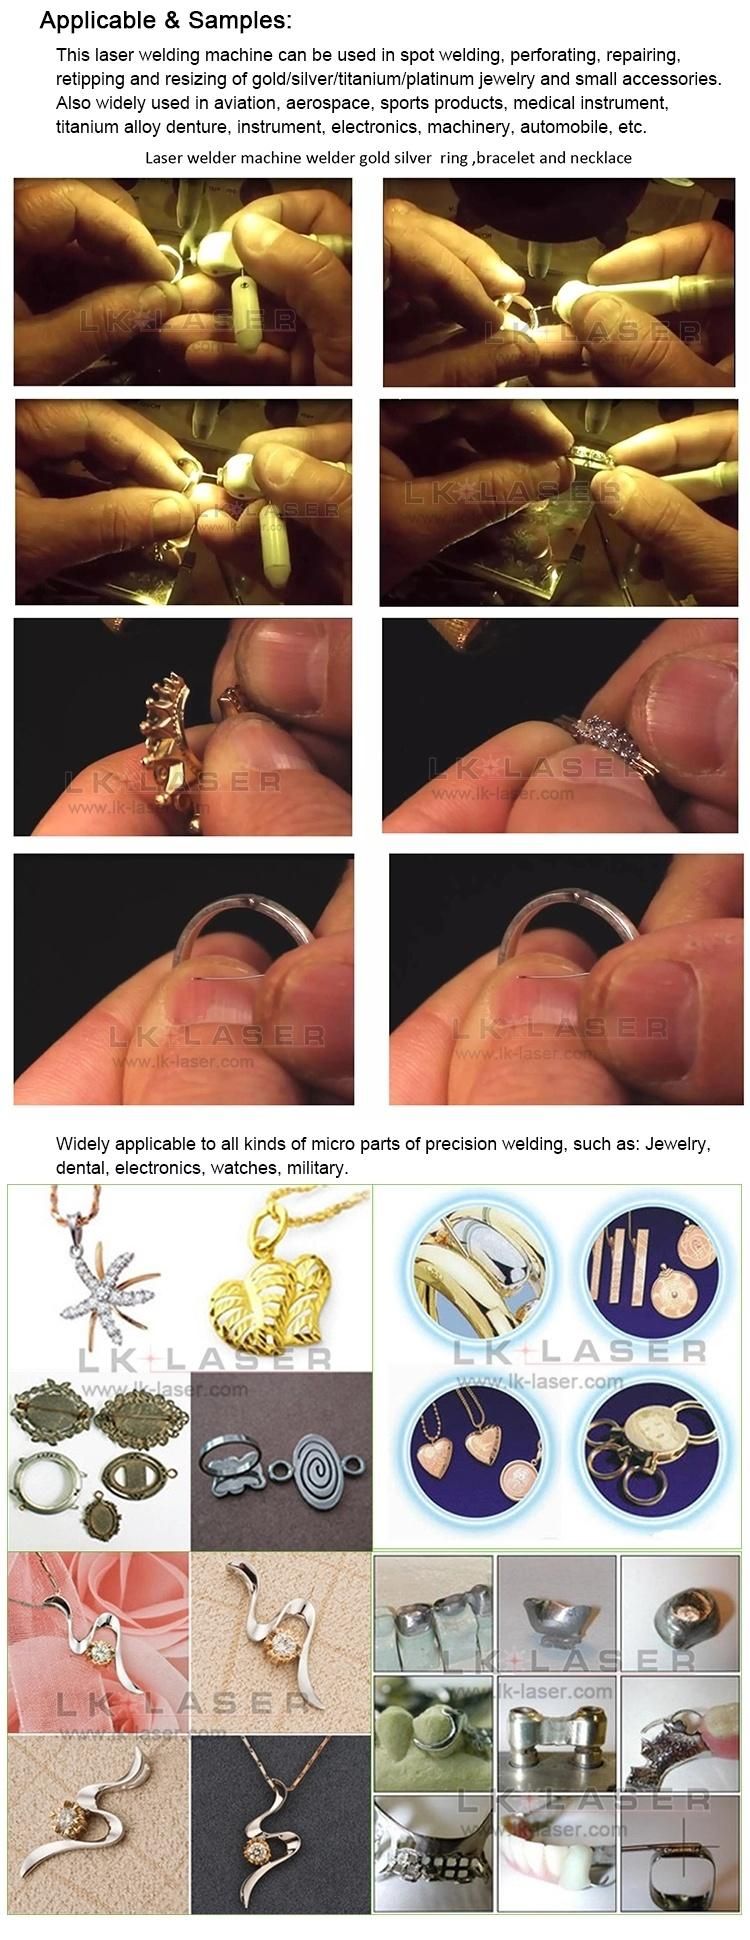 Jewelry Laser Soldering for Stainless Steel, Gold, Silver